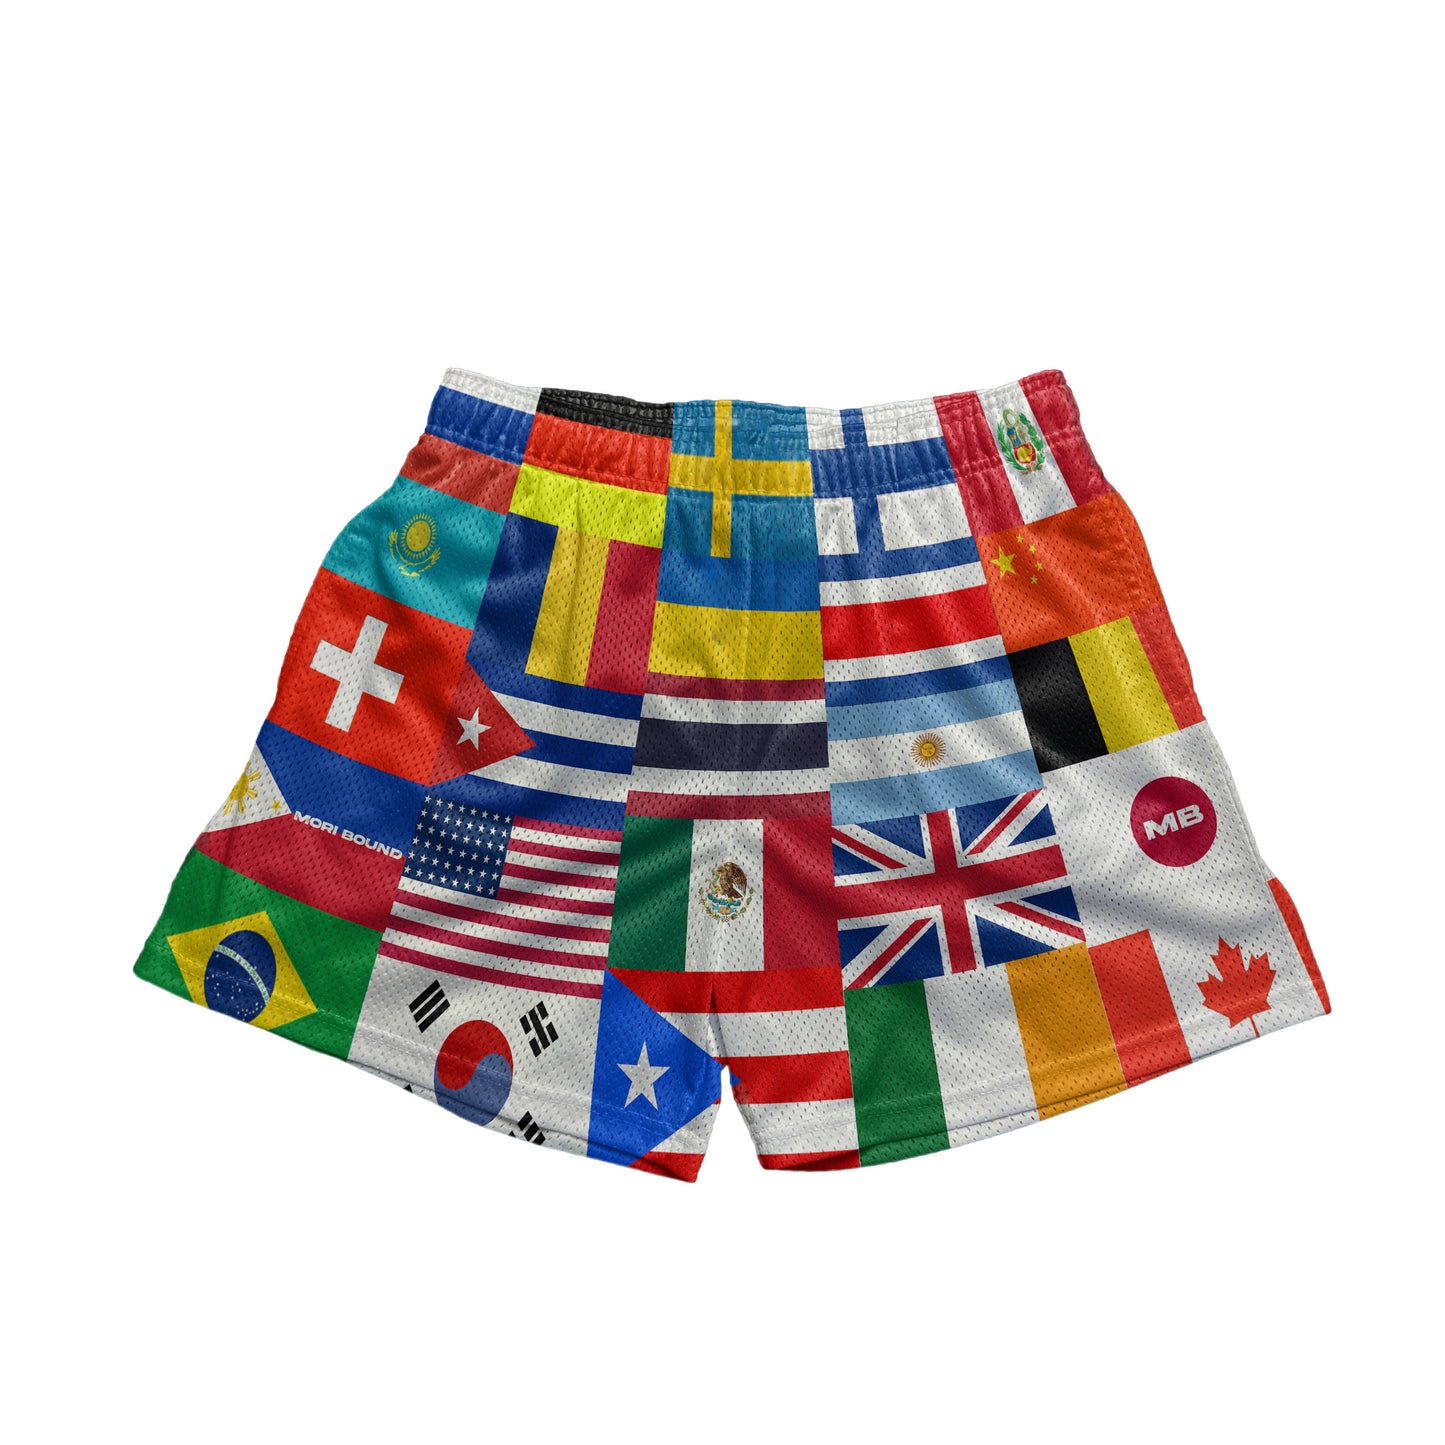 Fighter's World Shorts